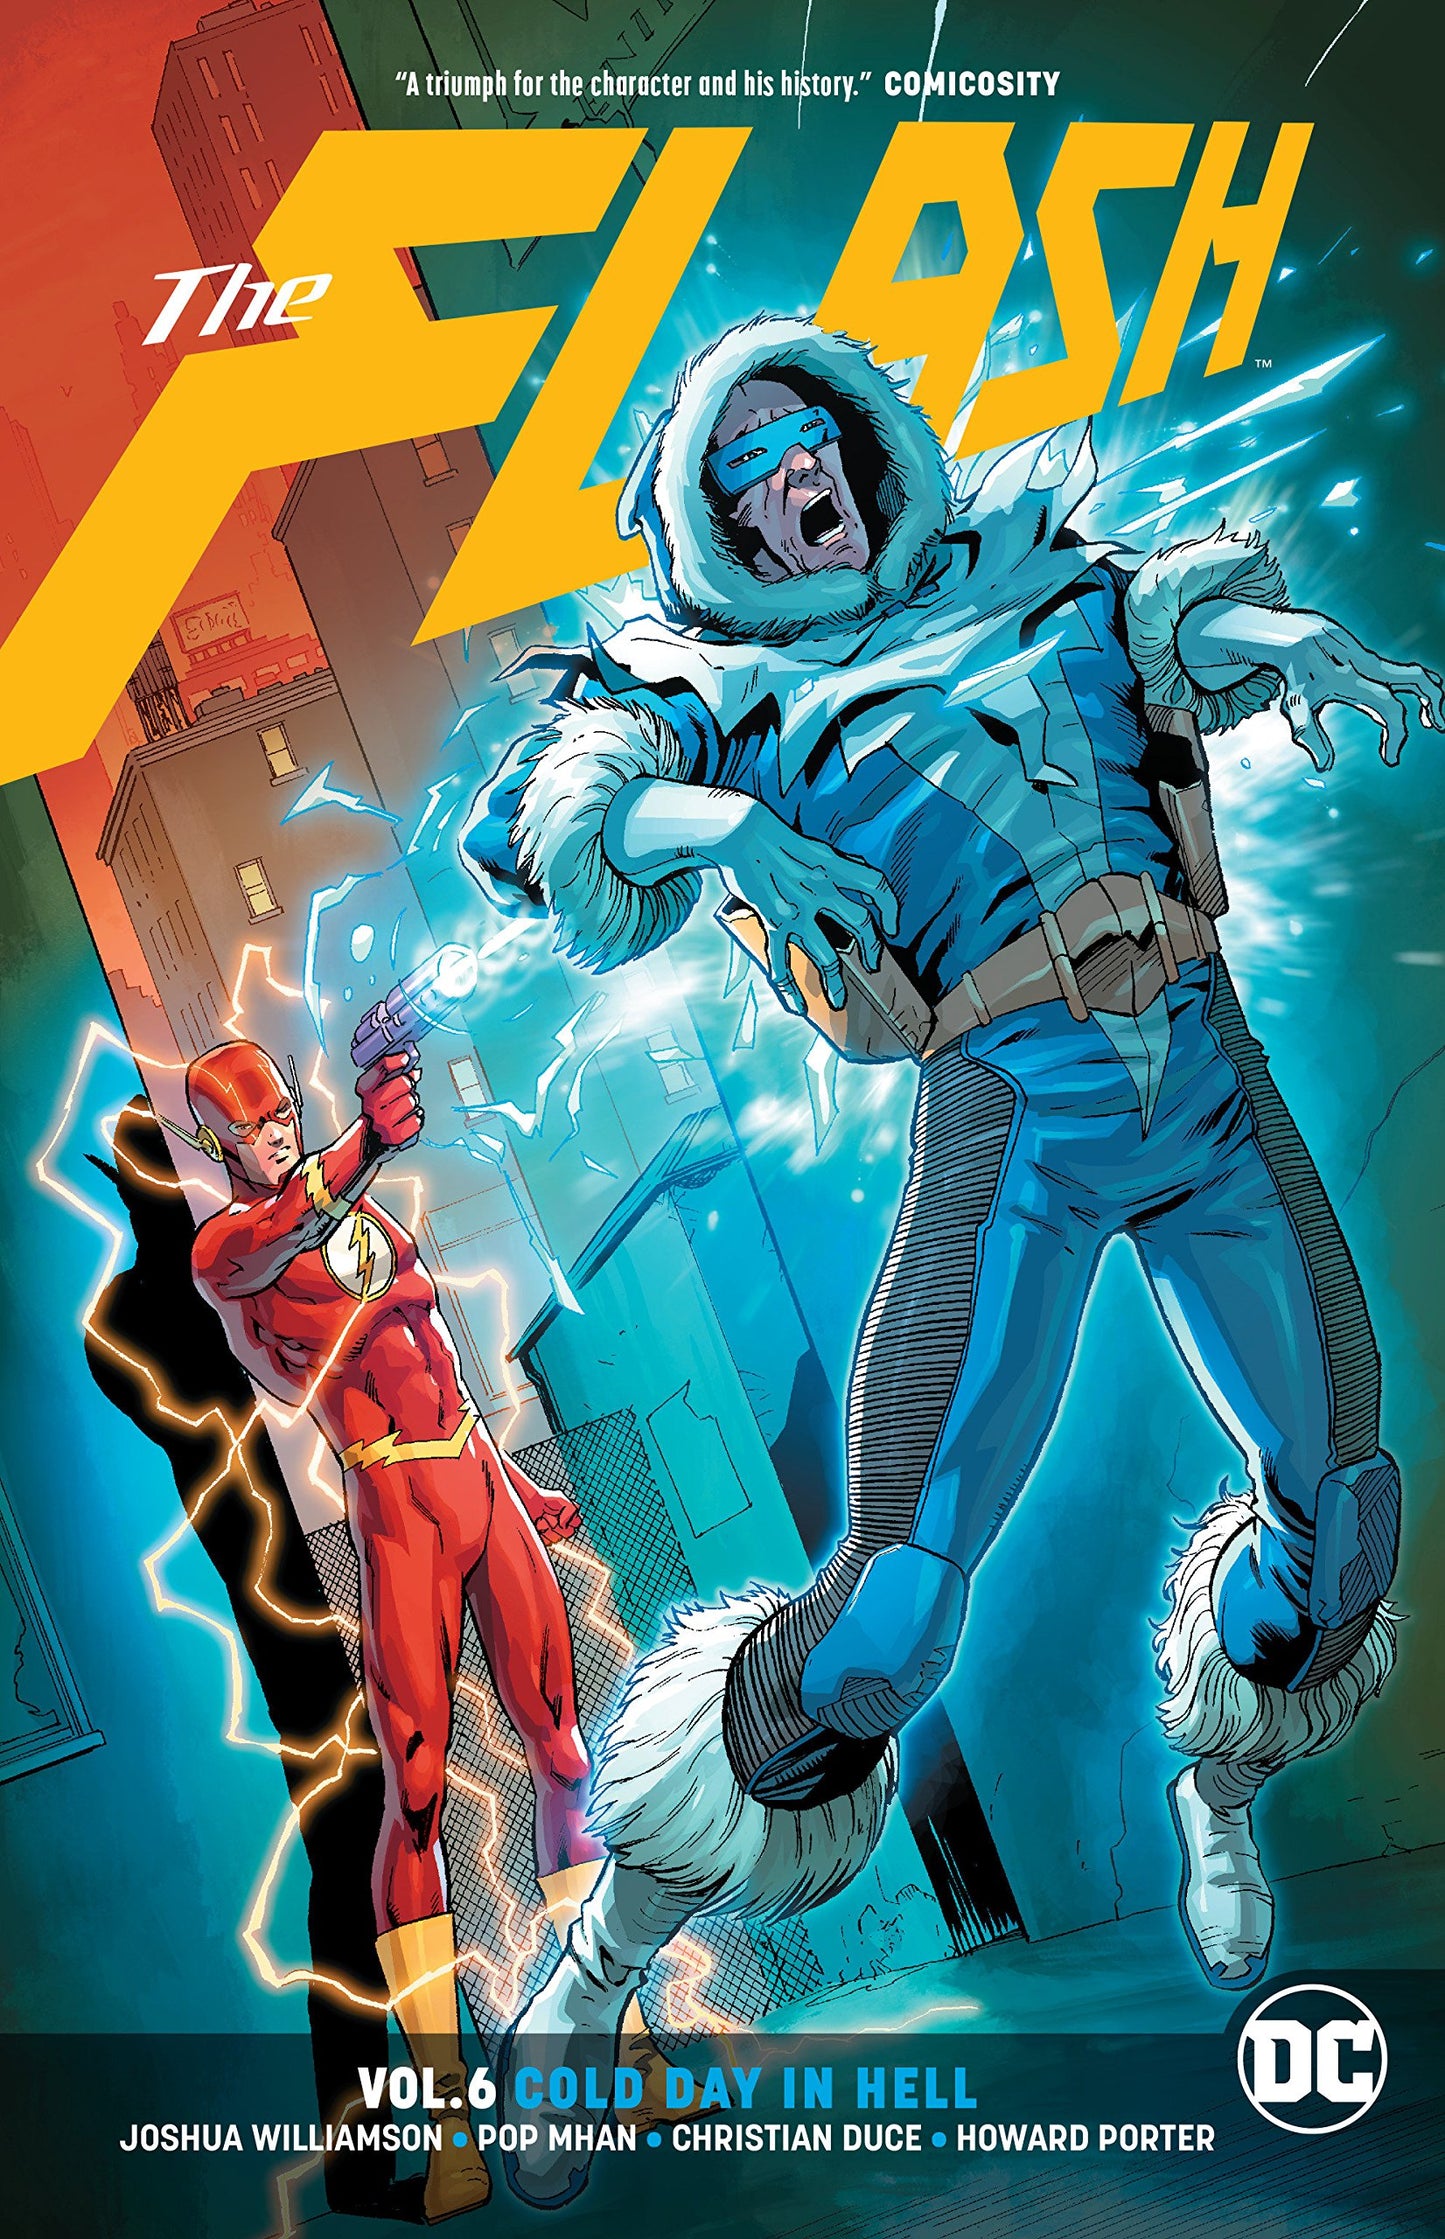 The Flash Vol. 06 Cold Day In Hell